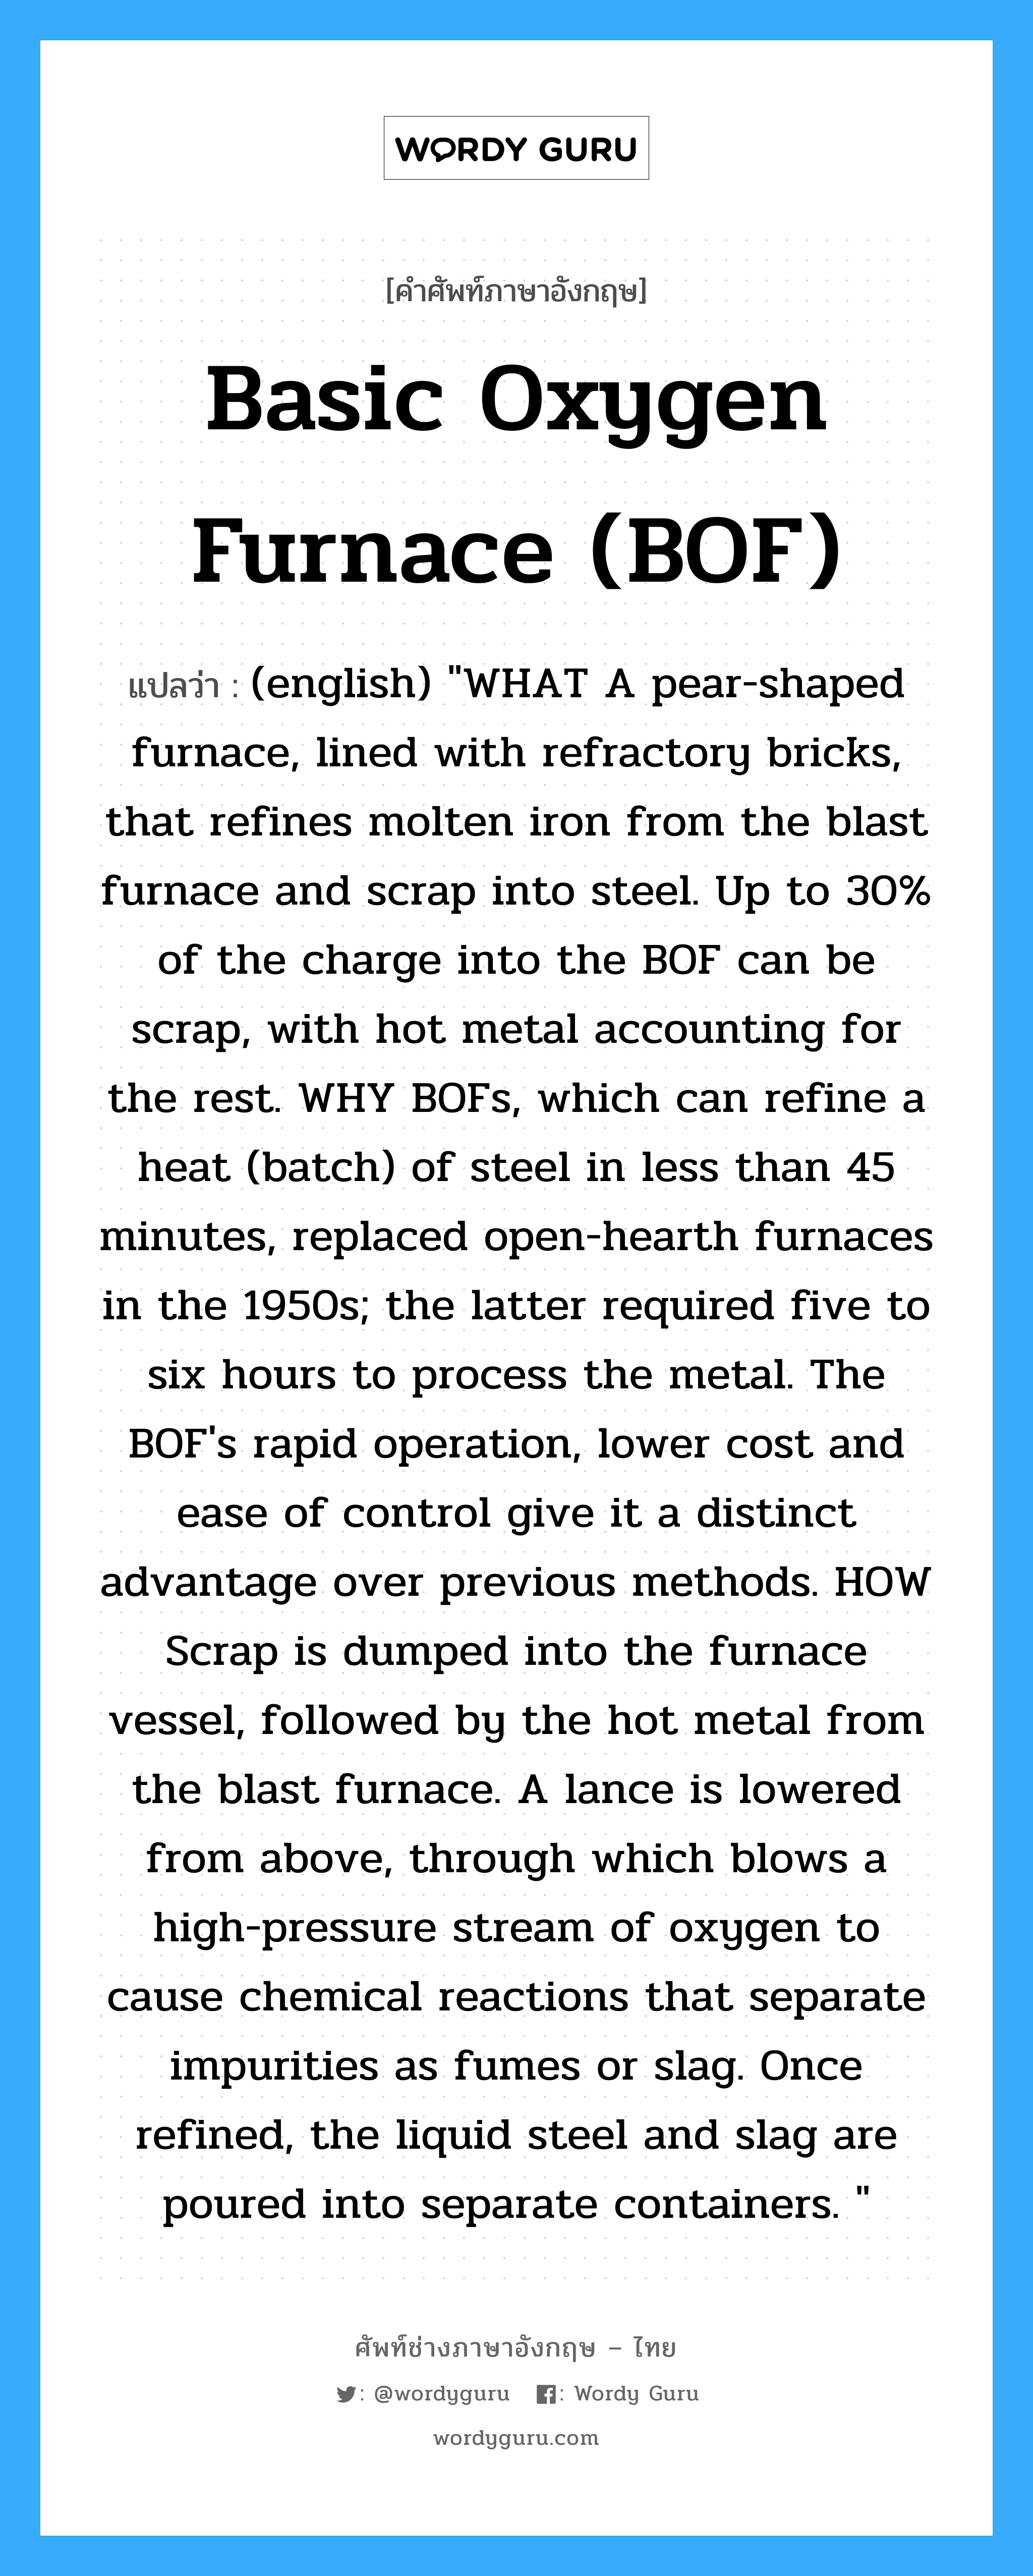 (english) "WHAT A pear-shaped furnace, lined with refractory bricks, that refines molten iron from the blast furnace and scrap into steel. Up to 30% of the charge into the BOF can be scrap, with hot metal accounting for the rest. WHY BOFs, which can refine a heat (batch) of steel in less than 45 minutes, replaced open-hearth furnaces in the 1950s; the latter required five to six hours to process the metal. The BOF's rapid operation, lower cost and ease of control give it a distinct advantage over previous methods. HOW Scrap is dumped into the furnace vessel, followed by the hot metal from the blast furnace. A lance is lowered from above, through which blows a high-pressure stream of oxygen to cause chemical reactions that separate impurities as fumes or slag. Once refined, the liquid steel and slag are poured into separate containers. " ภาษาอังกฤษ?, คำศัพท์ช่างภาษาอังกฤษ - ไทย (english) "WHAT A pear-shaped furnace, lined with refractory bricks, that refines molten iron from the blast furnace and scrap into steel. Up to 30% of the charge into the BOF can be scrap, with hot metal accounting for the rest. WHY BOFs, which can refine a heat (batch) of steel in less than 45 minutes, replaced open-hearth furnaces in the 1950s; the latter required five to six hours to process the metal. The BOF's rapid operation, lower cost and ease of control give it a distinct advantage over previous methods. HOW Scrap is dumped into the furnace vessel, followed by the hot metal from the blast furnace. A lance is lowered from above, through which blows a high-pressure stream of oxygen to cause chemical reactions that separate impurities as fumes or slag. Once refined, the liquid steel and slag are poured into separate containers. " คำศัพท์ภาษาอังกฤษ (english) "WHAT A pear-shaped furnace, lined with refractory bricks, that refines molten iron from the blast furnace and scrap into steel. Up to 30% of the charge into the BOF can be scrap, with hot metal accounting for the rest. WHY BOFs, which can refine a heat (batch) of steel in less than 45 minutes, replaced open-hearth furnaces in the 1950s; the latter required five to six hours to process the metal. The BOF's rapid operation, lower cost and ease of control give it a distinct advantage over previous methods. HOW Scrap is dumped into the furnace vessel, followed by the hot metal from the blast furnace. A lance is lowered from above, through which blows a high-pressure stream of oxygen to cause chemical reactions that separate impurities as fumes or slag. Once refined, the liquid steel and slag are poured into separate containers. " แปลว่า Basic Oxygen Furnace (BOF)